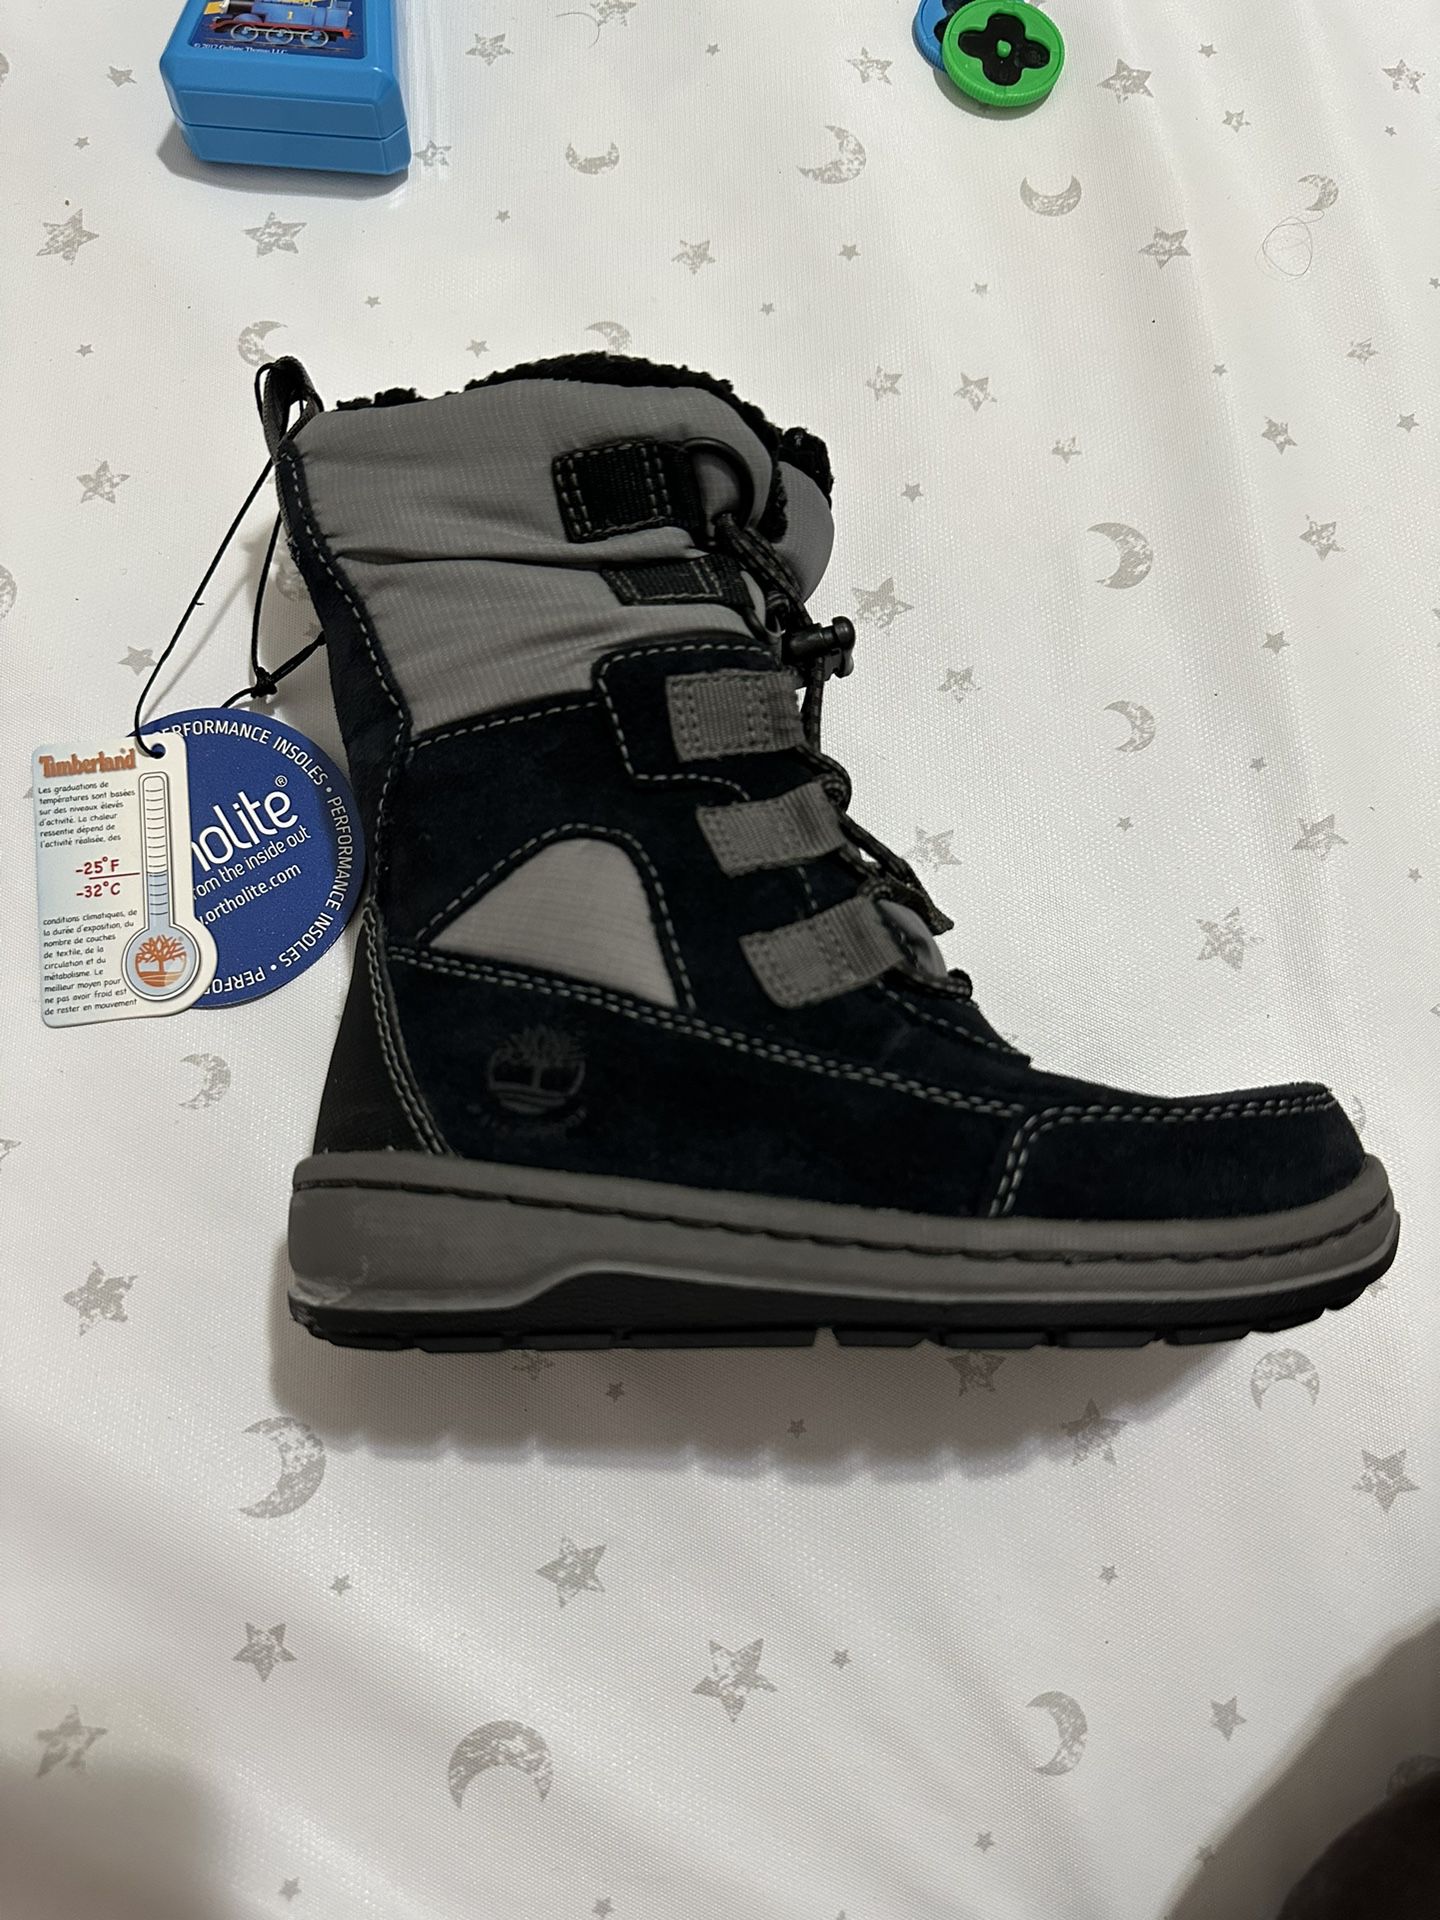 Timberland Toddler boots Size 9.5